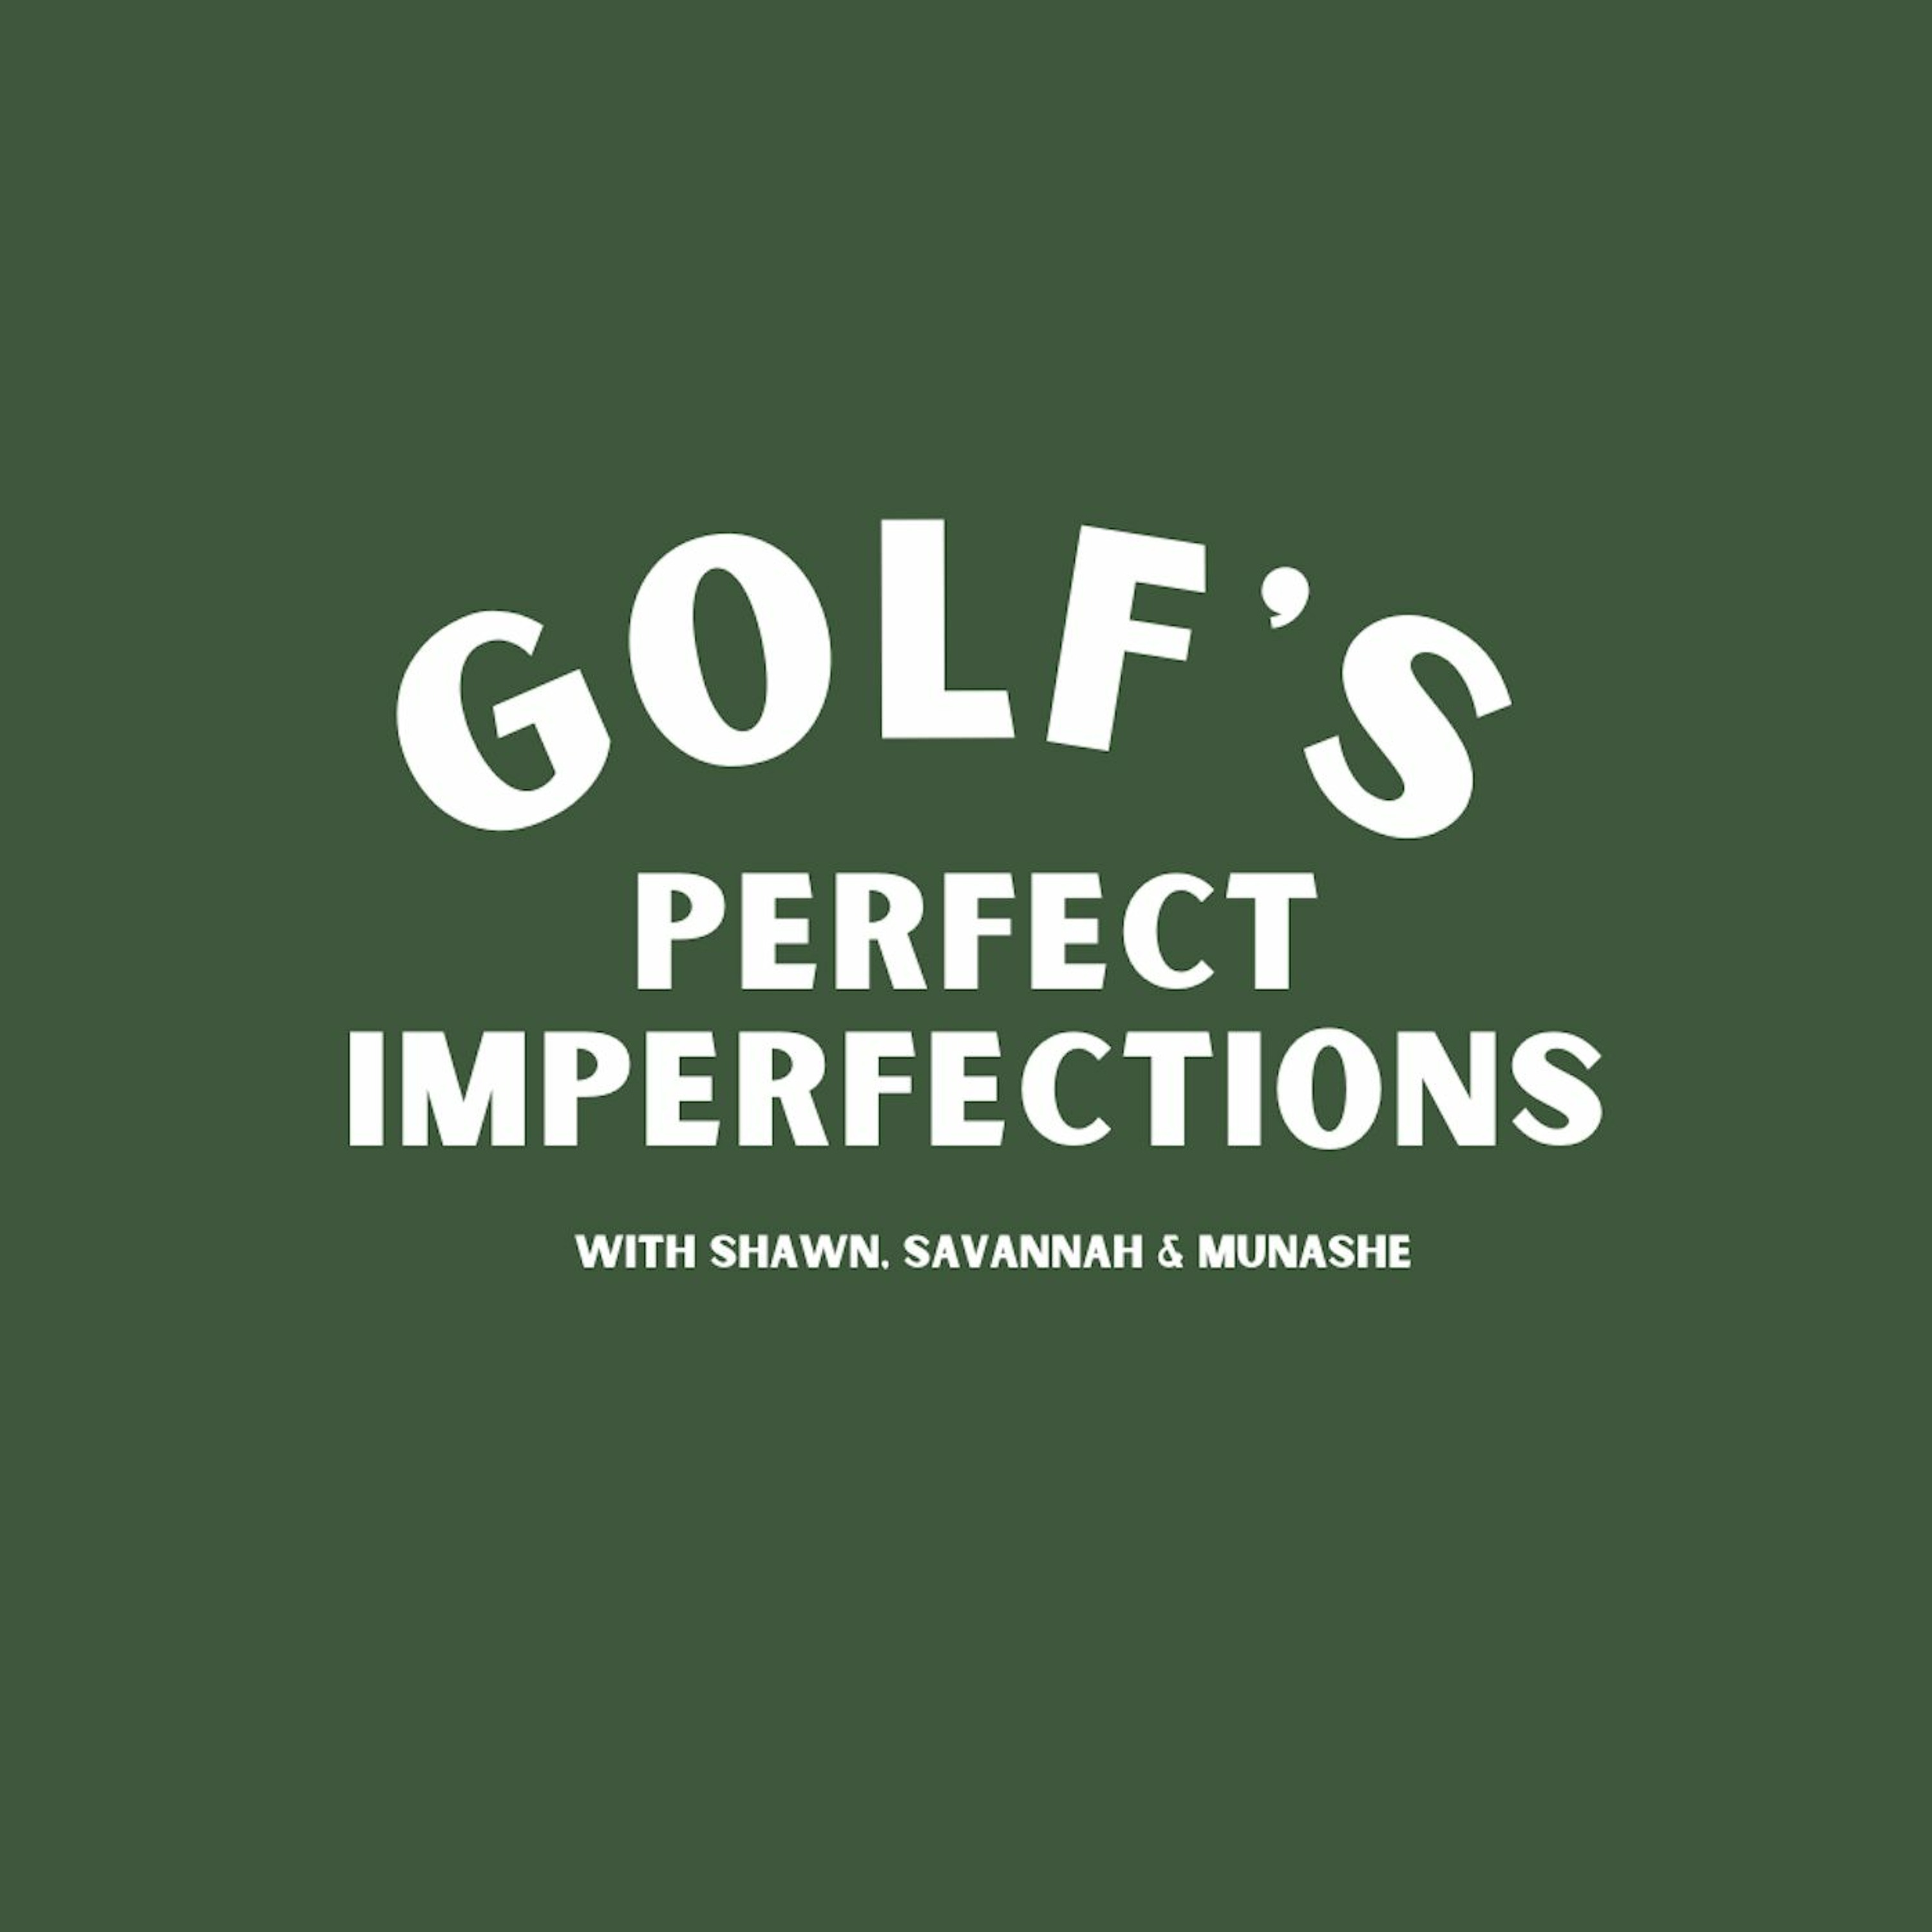 Golf’s Perfect Imperfections: How to get the most out of your practice from your mind and body.